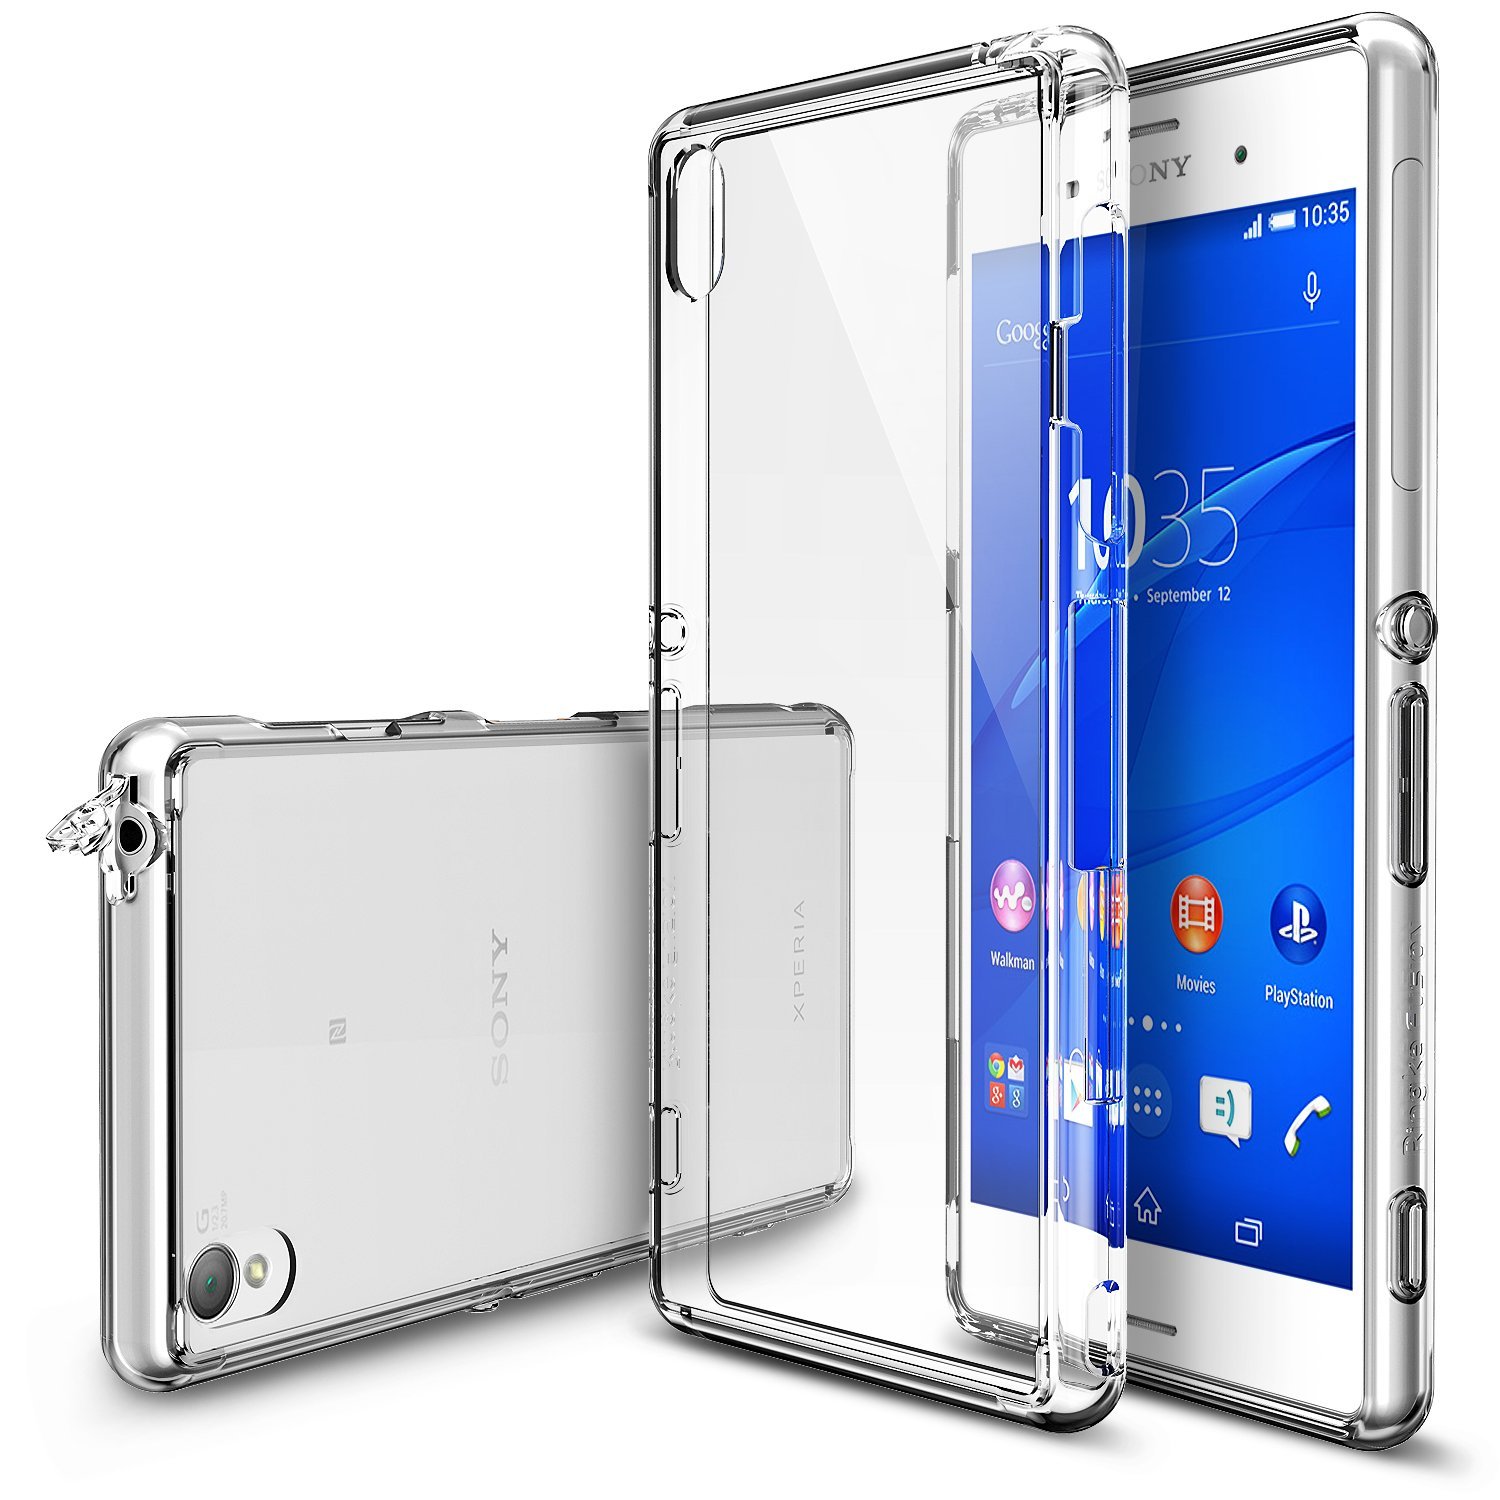 10 Best cases for Sony Xperia Z3 6